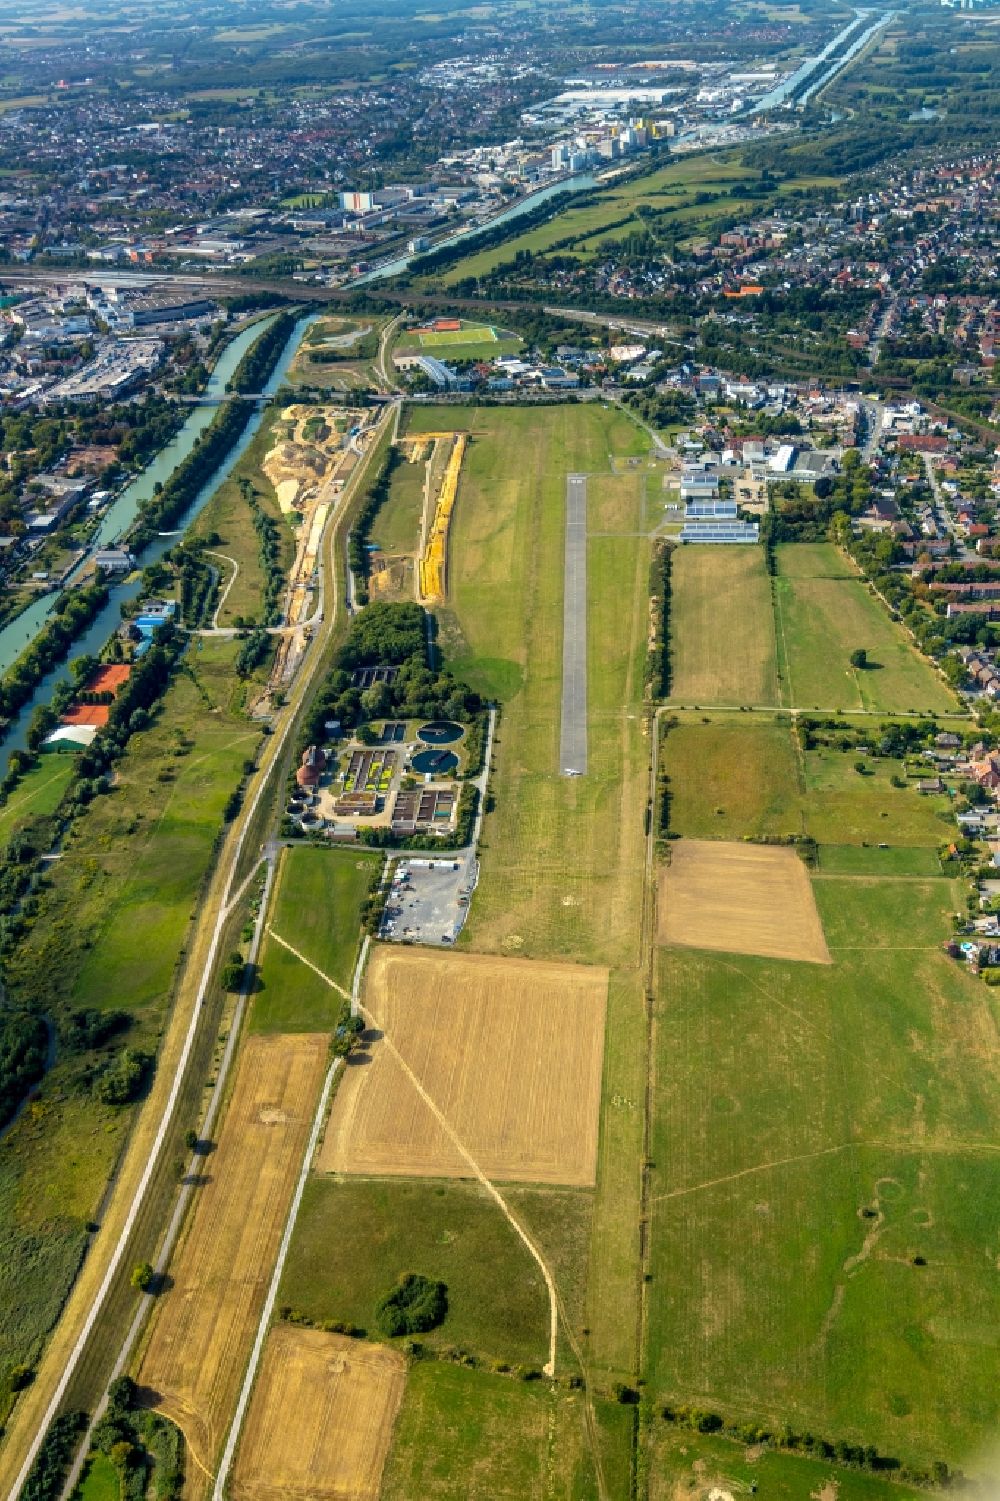 Hamm from above - Building site for the construction and design of a new park with paths and green spaces named Erlebensraum Lippeaue with the Hamm airport and the newly built canal construction in Hamm in the federal state of North Rhine-Westphalia, Germany